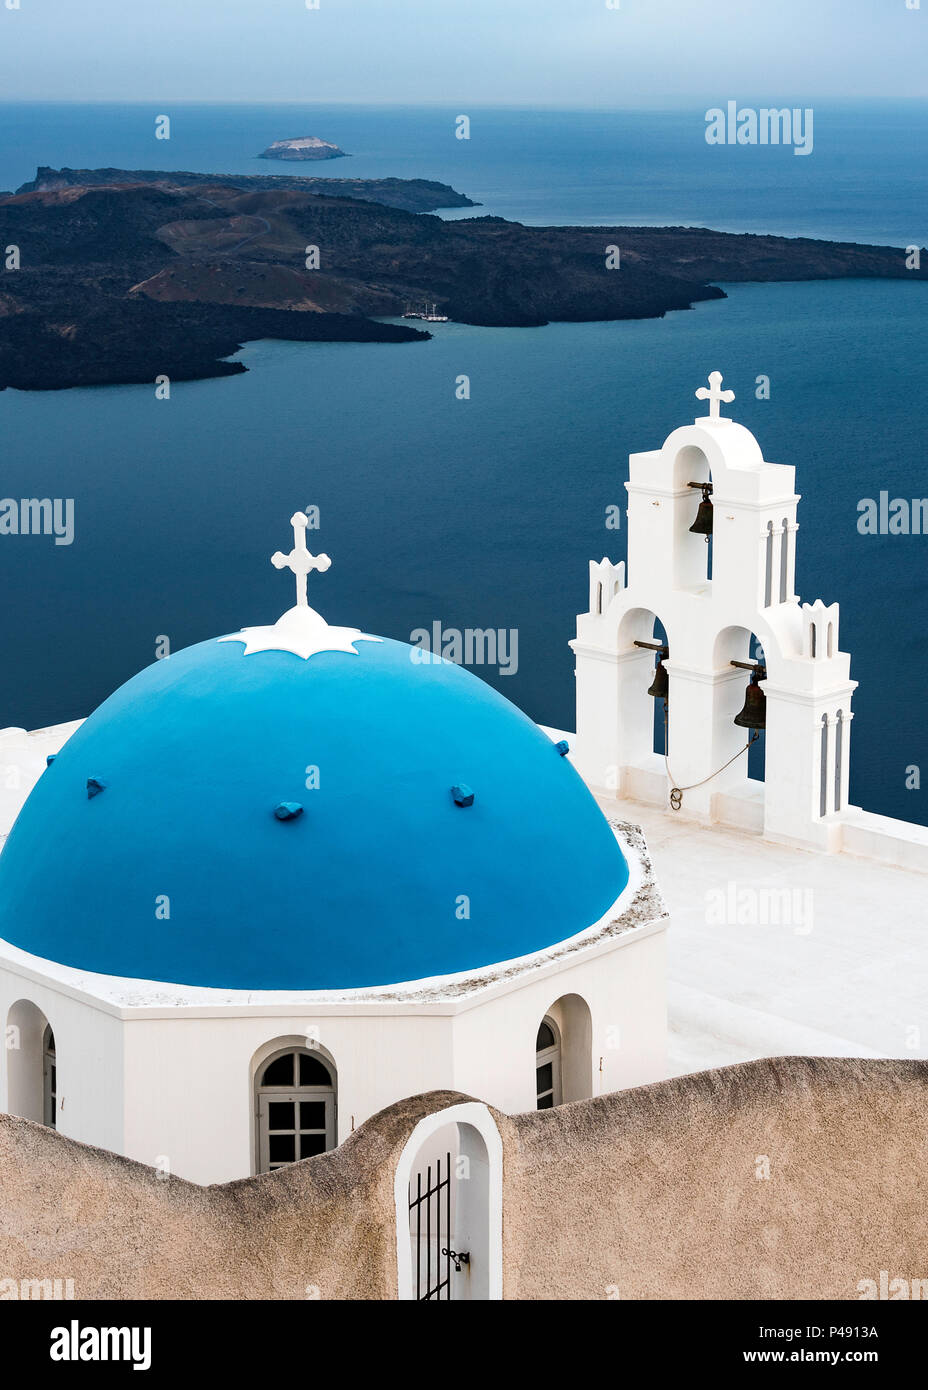 The three Bells of Fira with blue dome, a Greek orthodox church on the cliff top near the town of Fira, on the island of Santorini, Greece Stock Photo